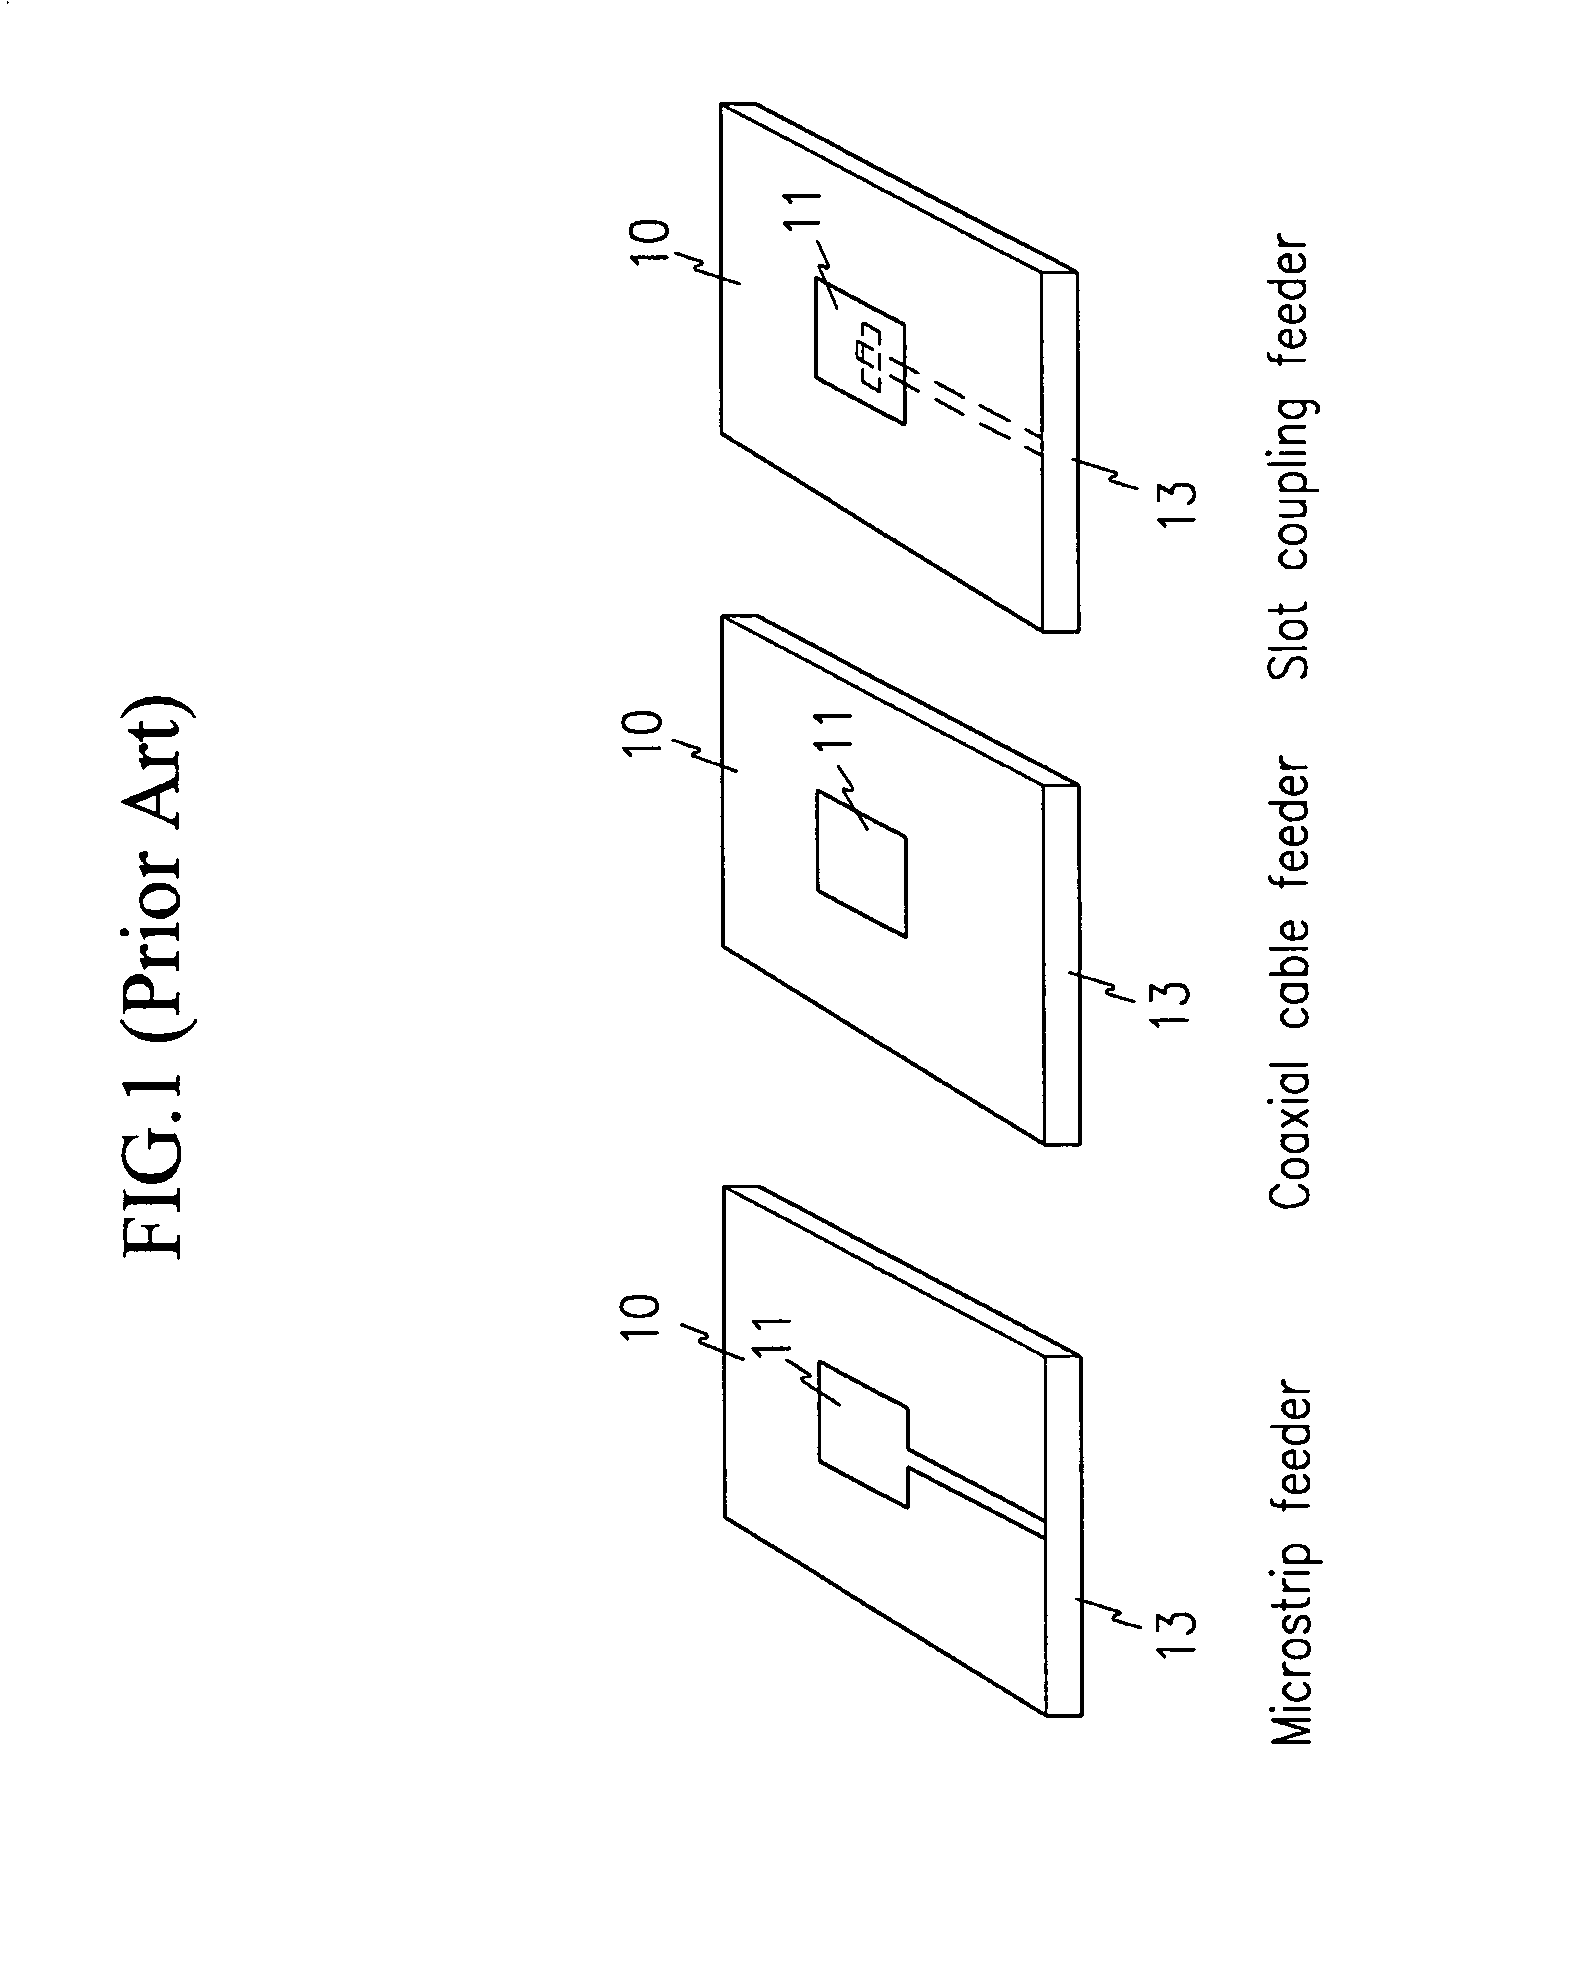 Wide band antenna for mobile communication